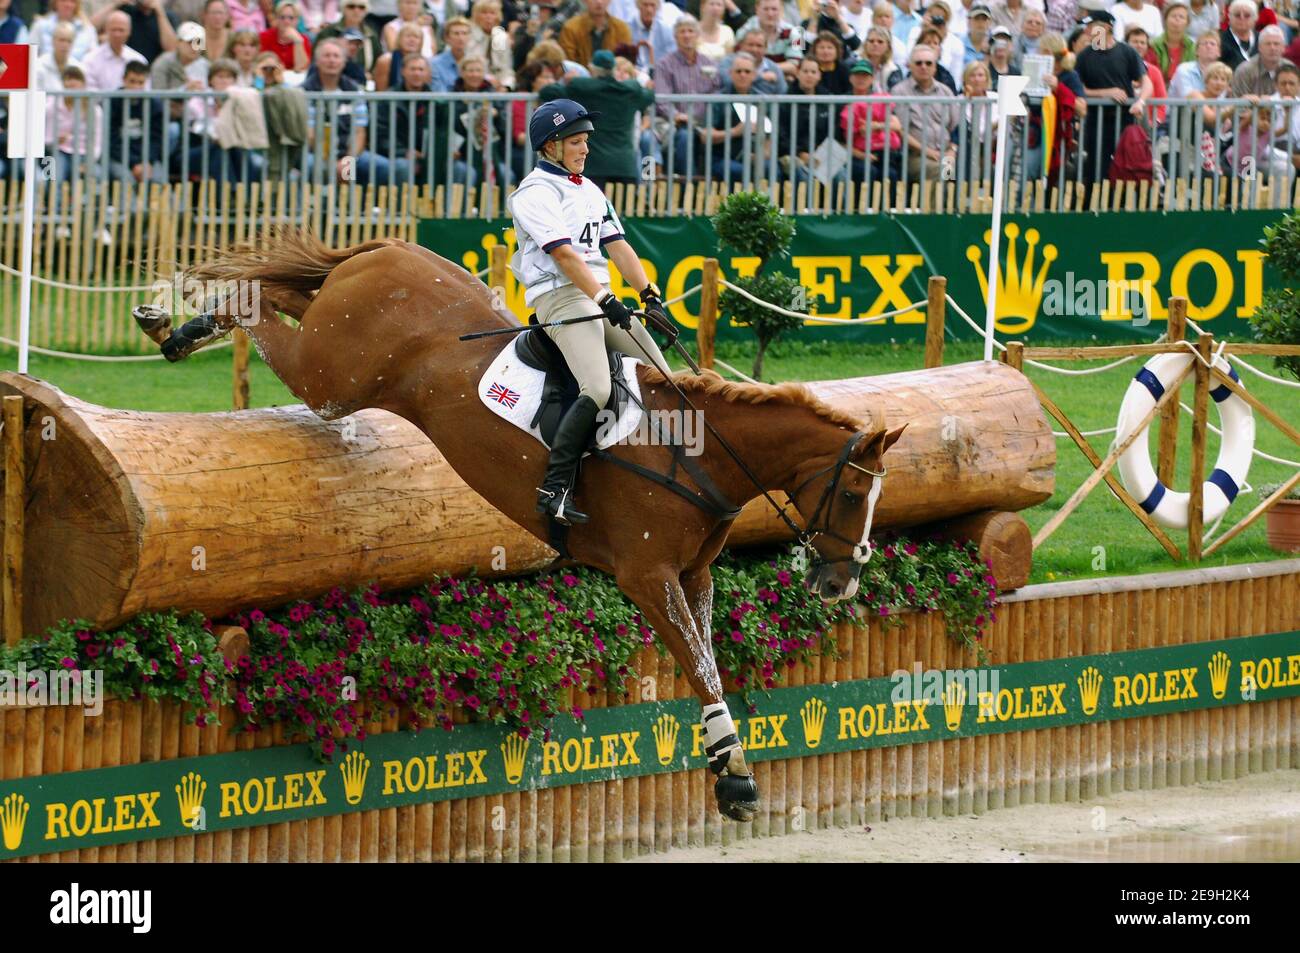 Great Britain's Zara Phillips on her horse 'Toy Town' during the Cross  Country competition of the